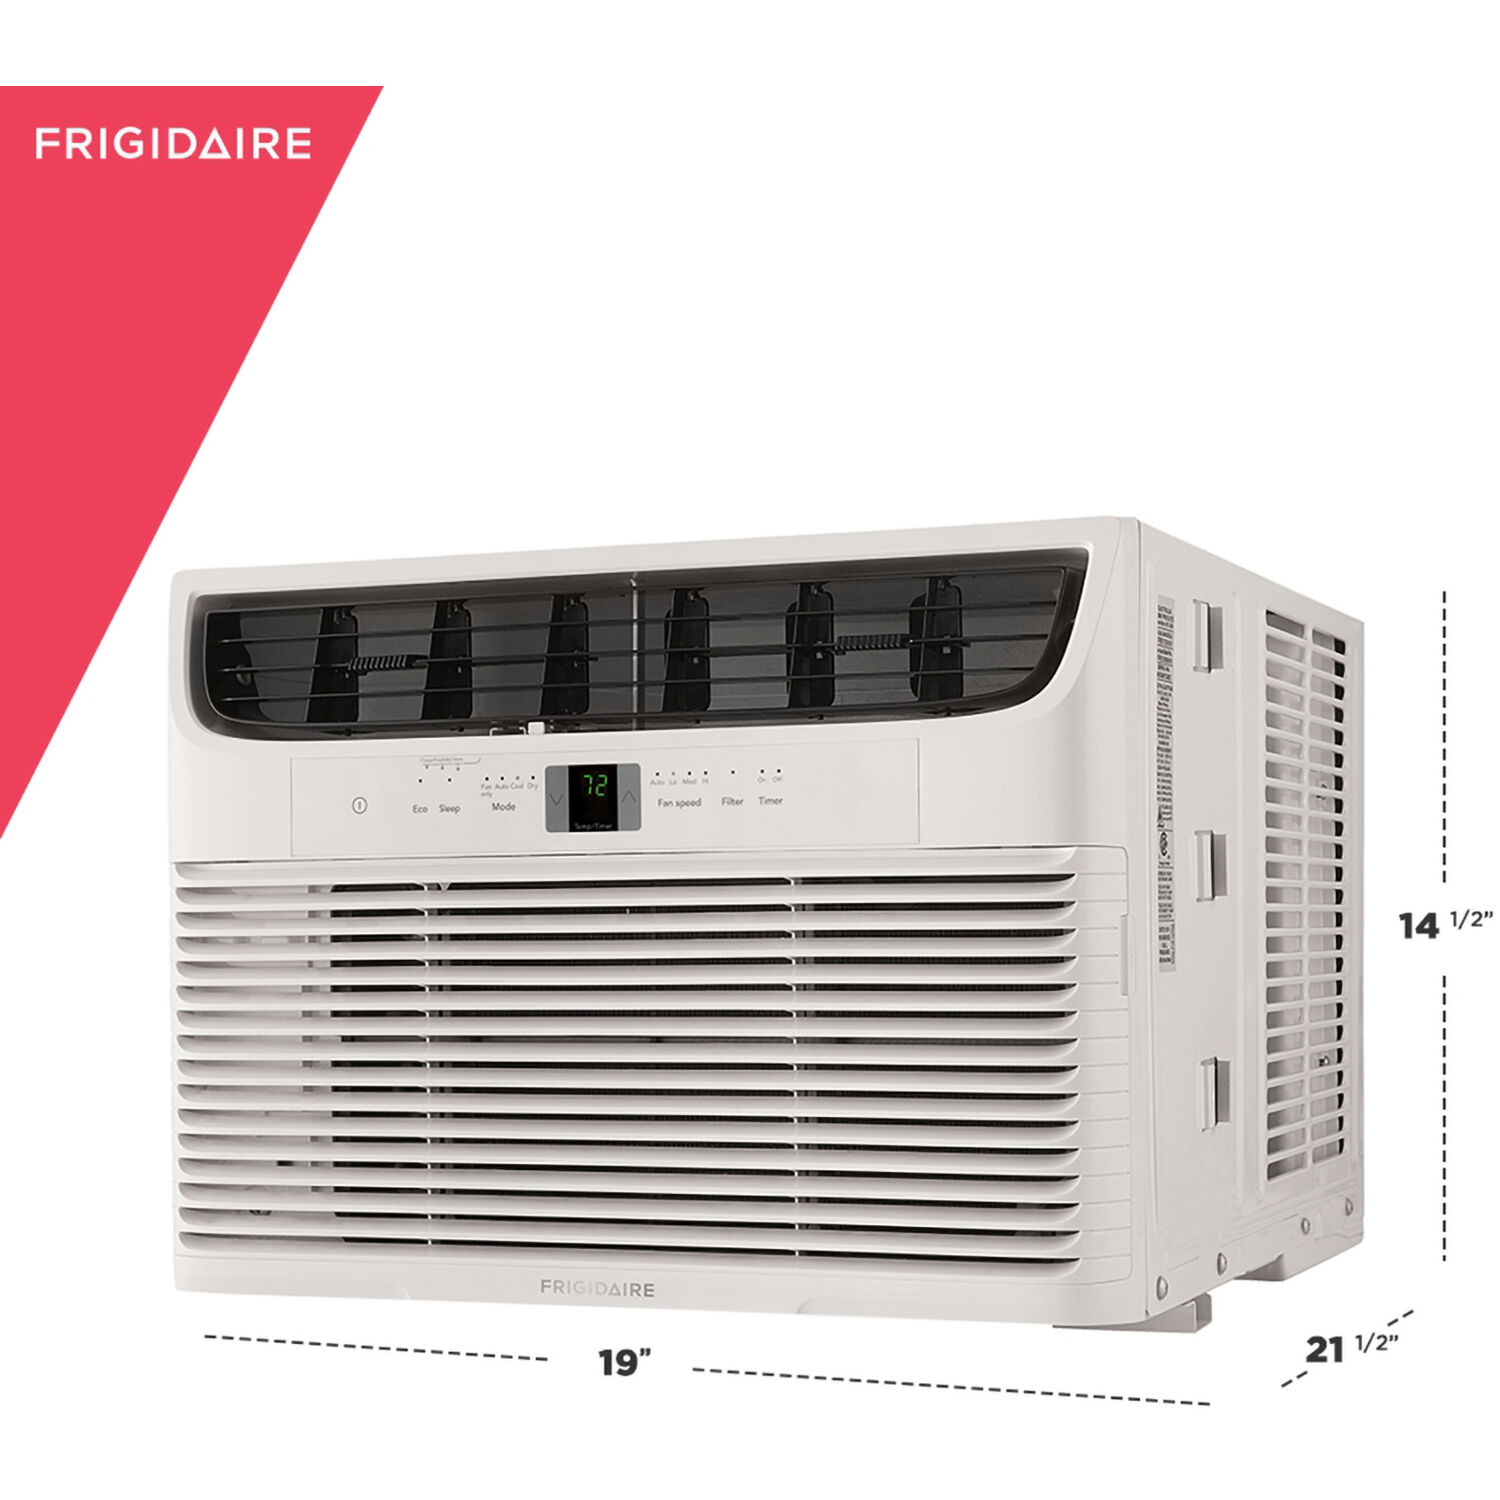 Frigidaire 12,000 BTU 115V Window-Mounted Compact Air Conditioner with Remote Control - image 4 of 10